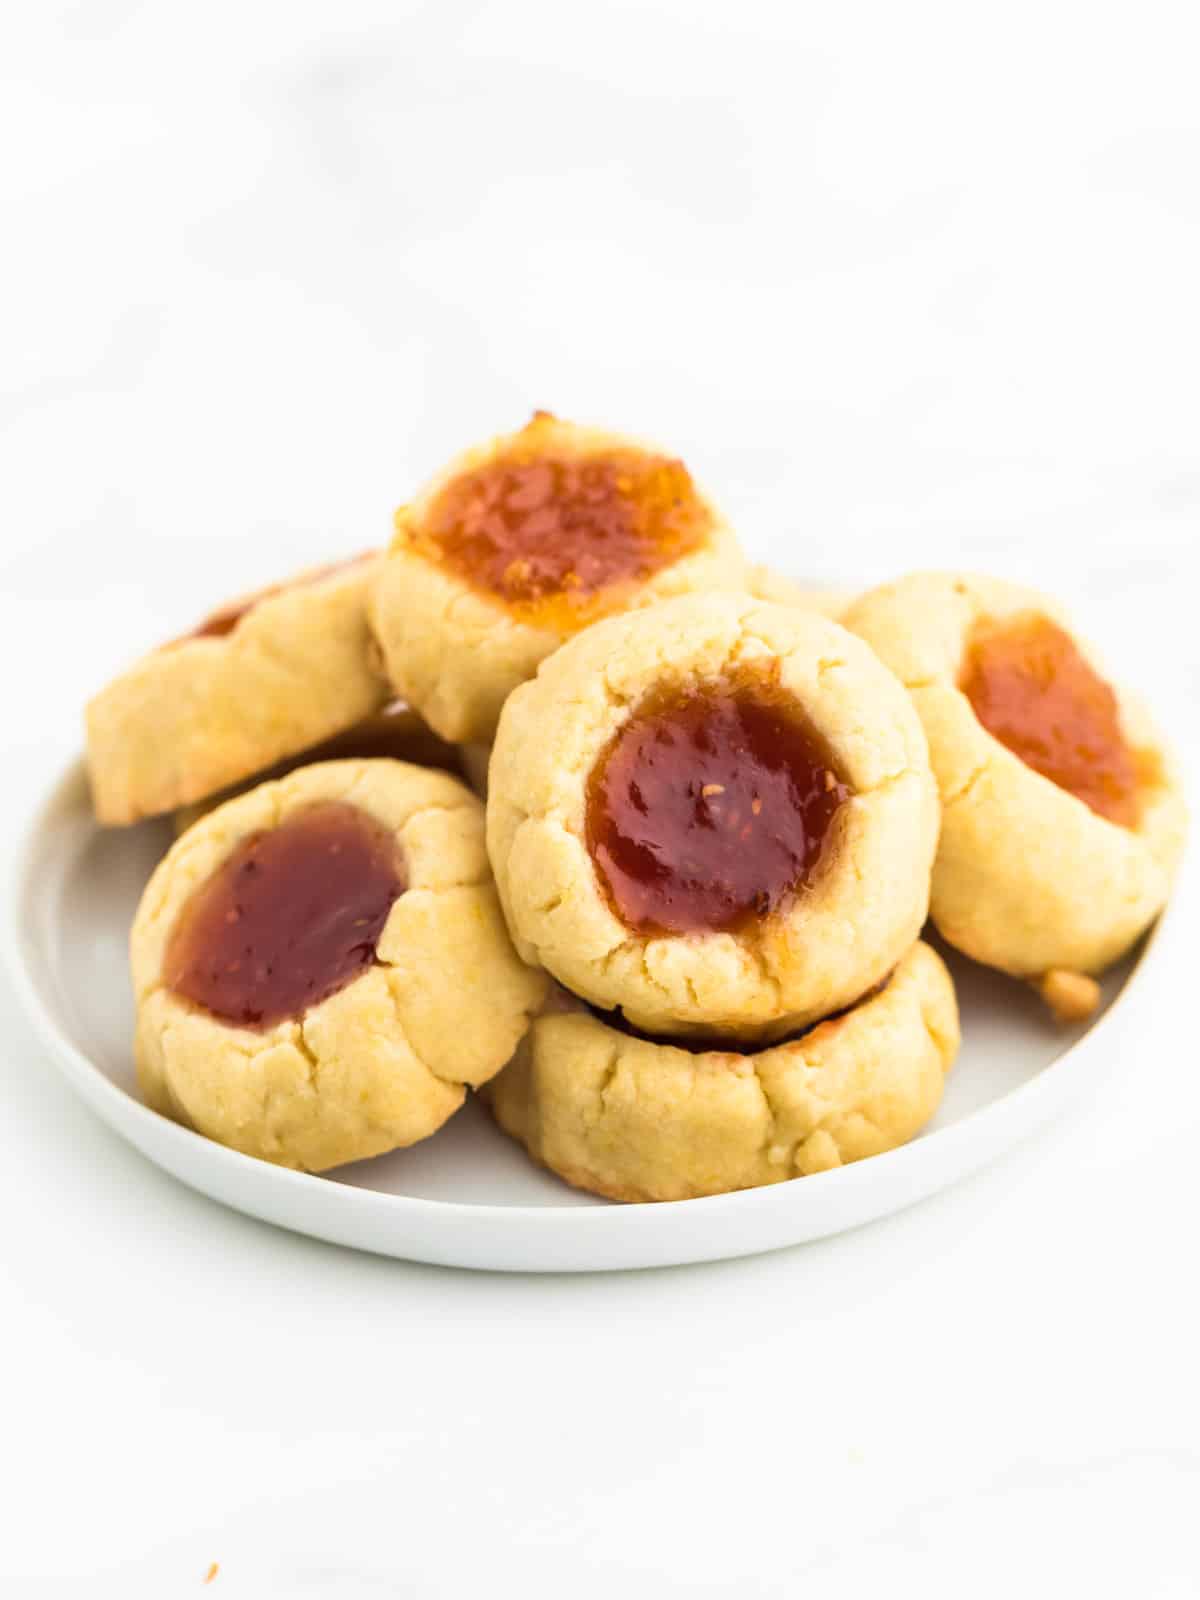 A plate of freshly baked Thumbprint Cookies.